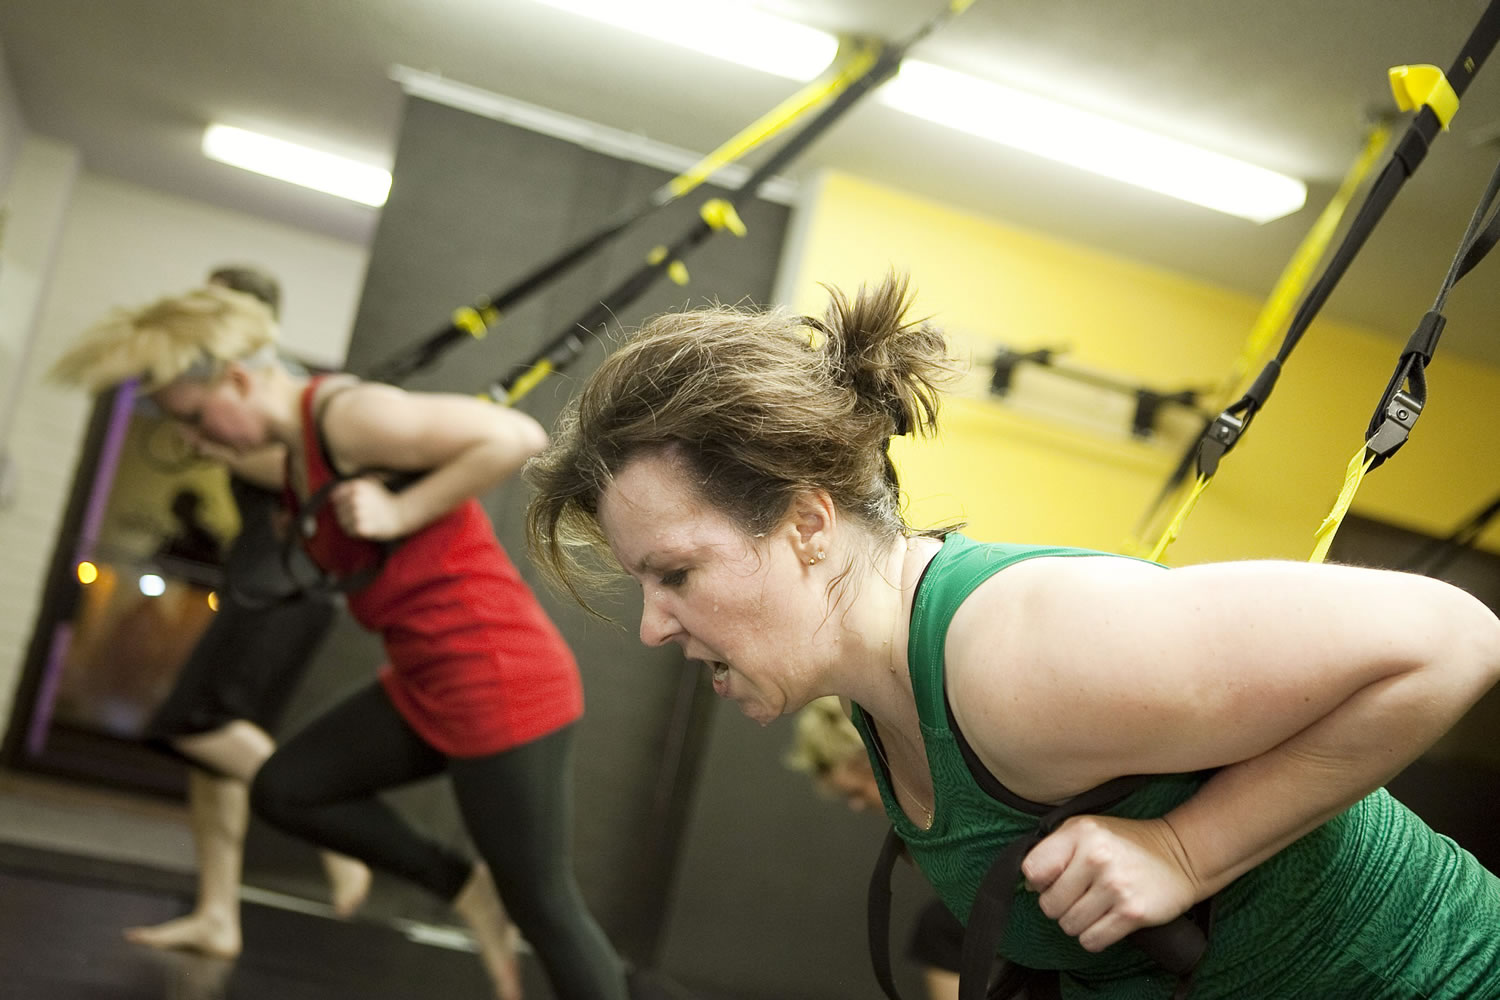 Janelle Hoyt, 47, works up a sweat during the TRX Suspension Training class at Flores Fitness.